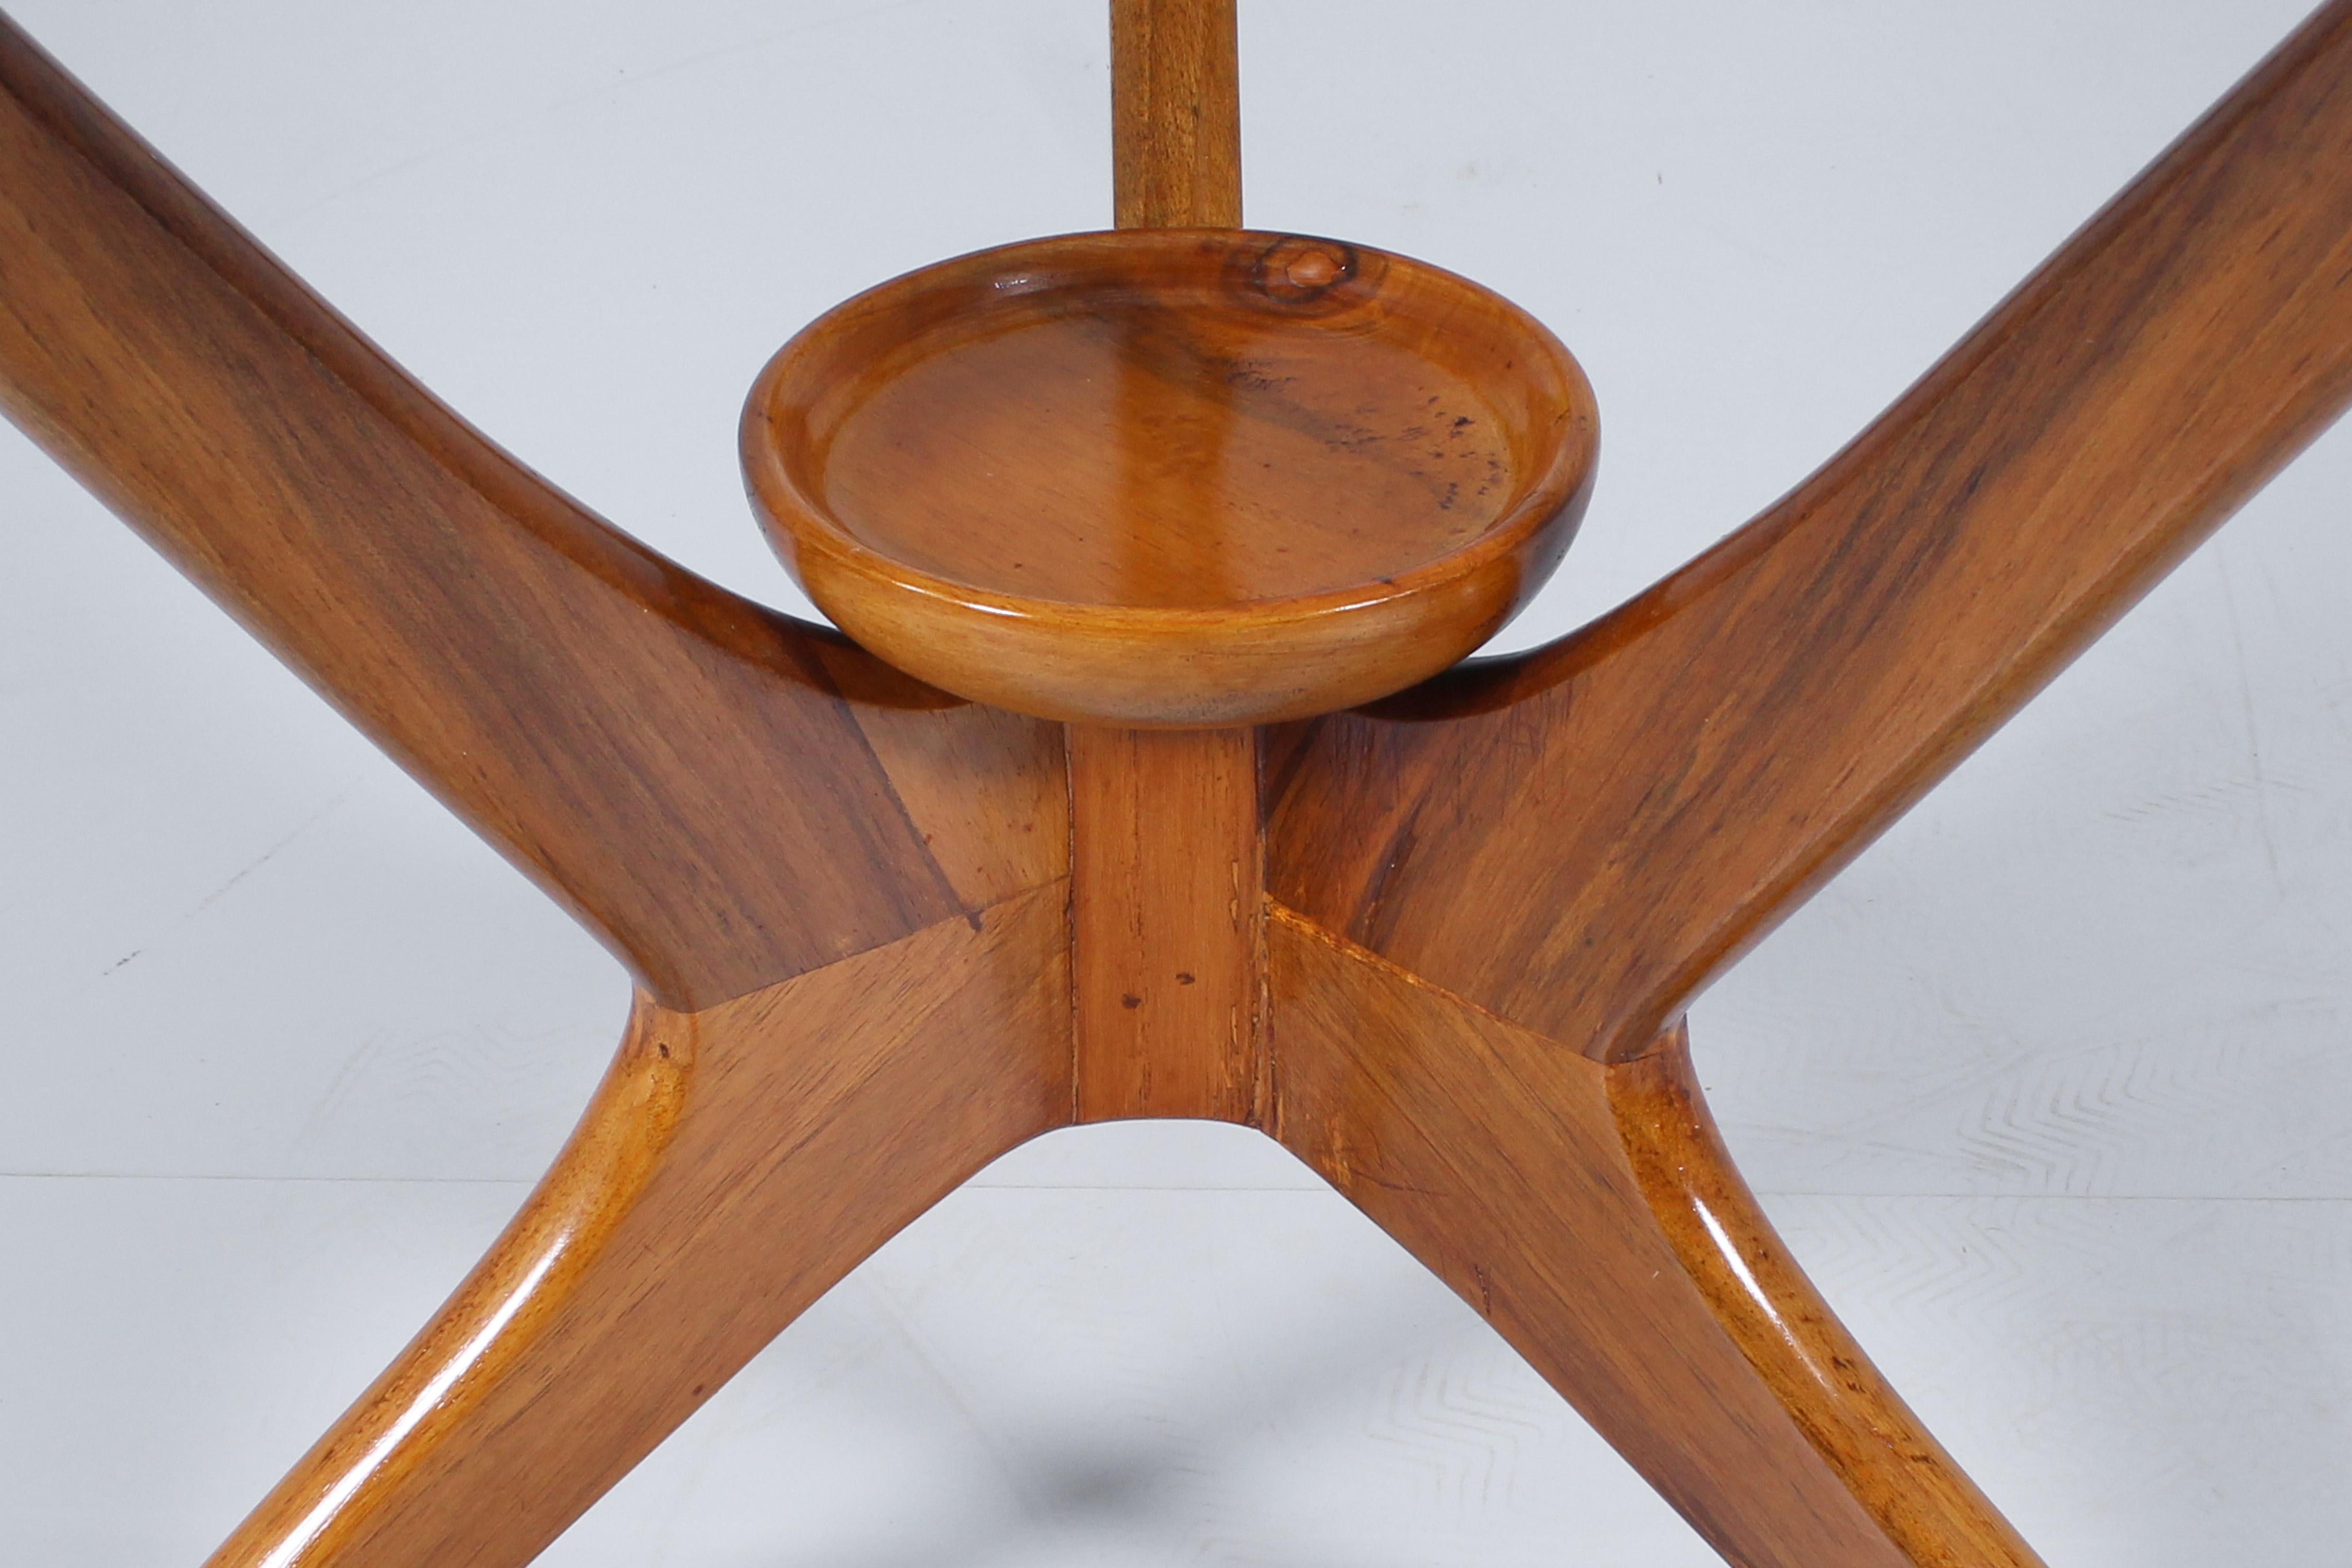 Mid-20th Century Midcentury Ico Parisi Style Wood and Glass Coffee Table 60s Italy For Sale